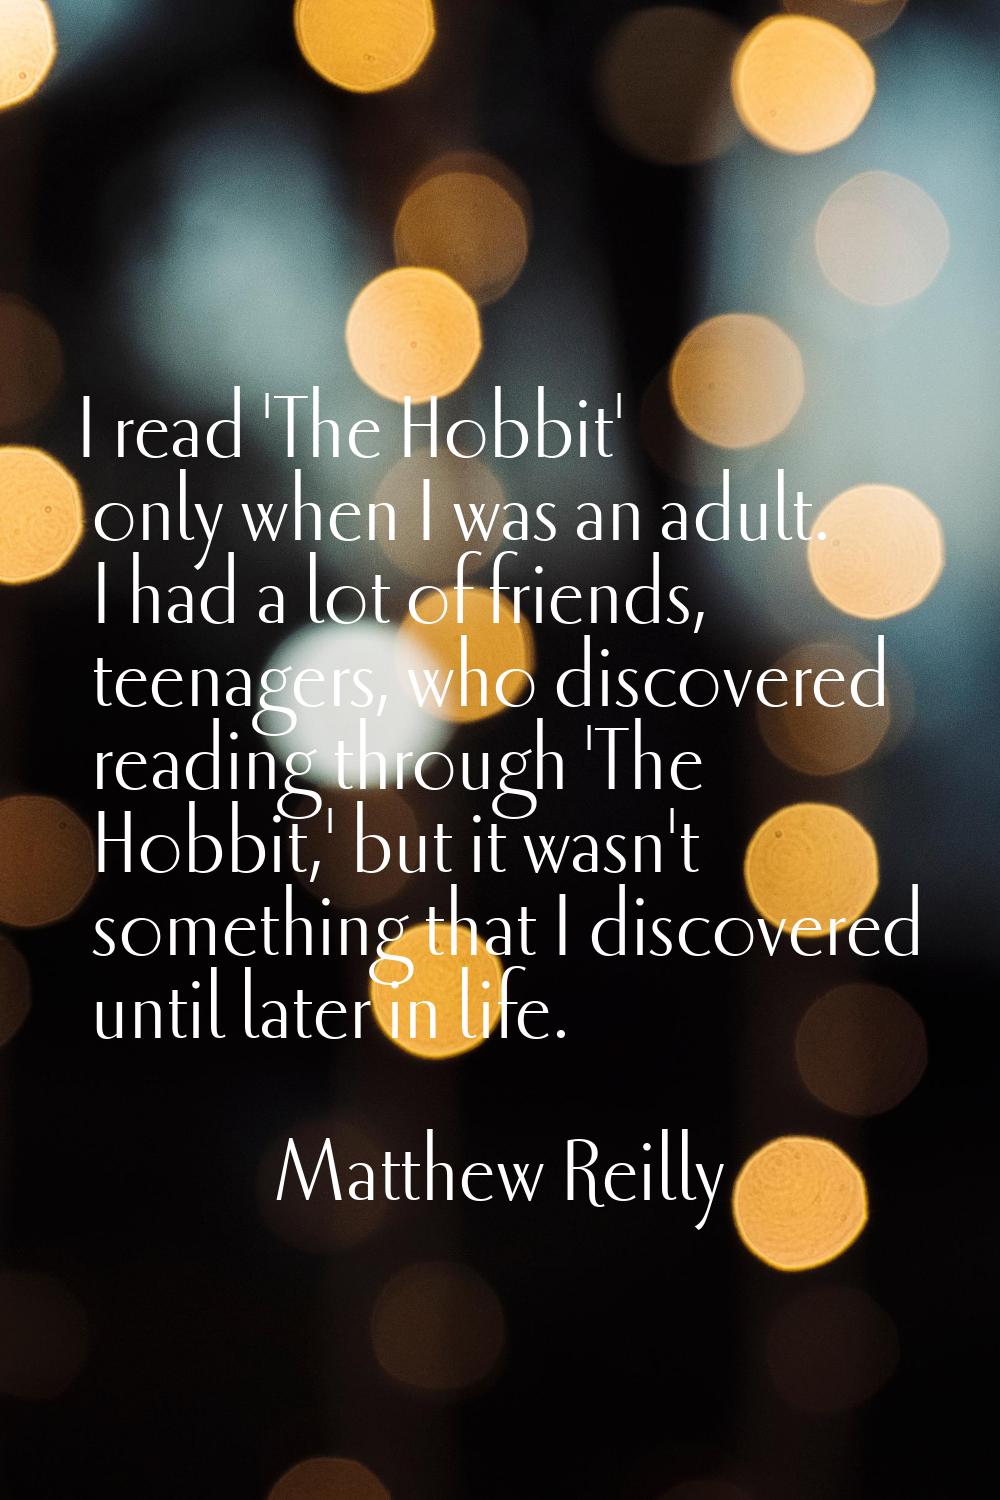 I read 'The Hobbit' only when I was an adult. I had a lot of friends, teenagers, who discovered rea